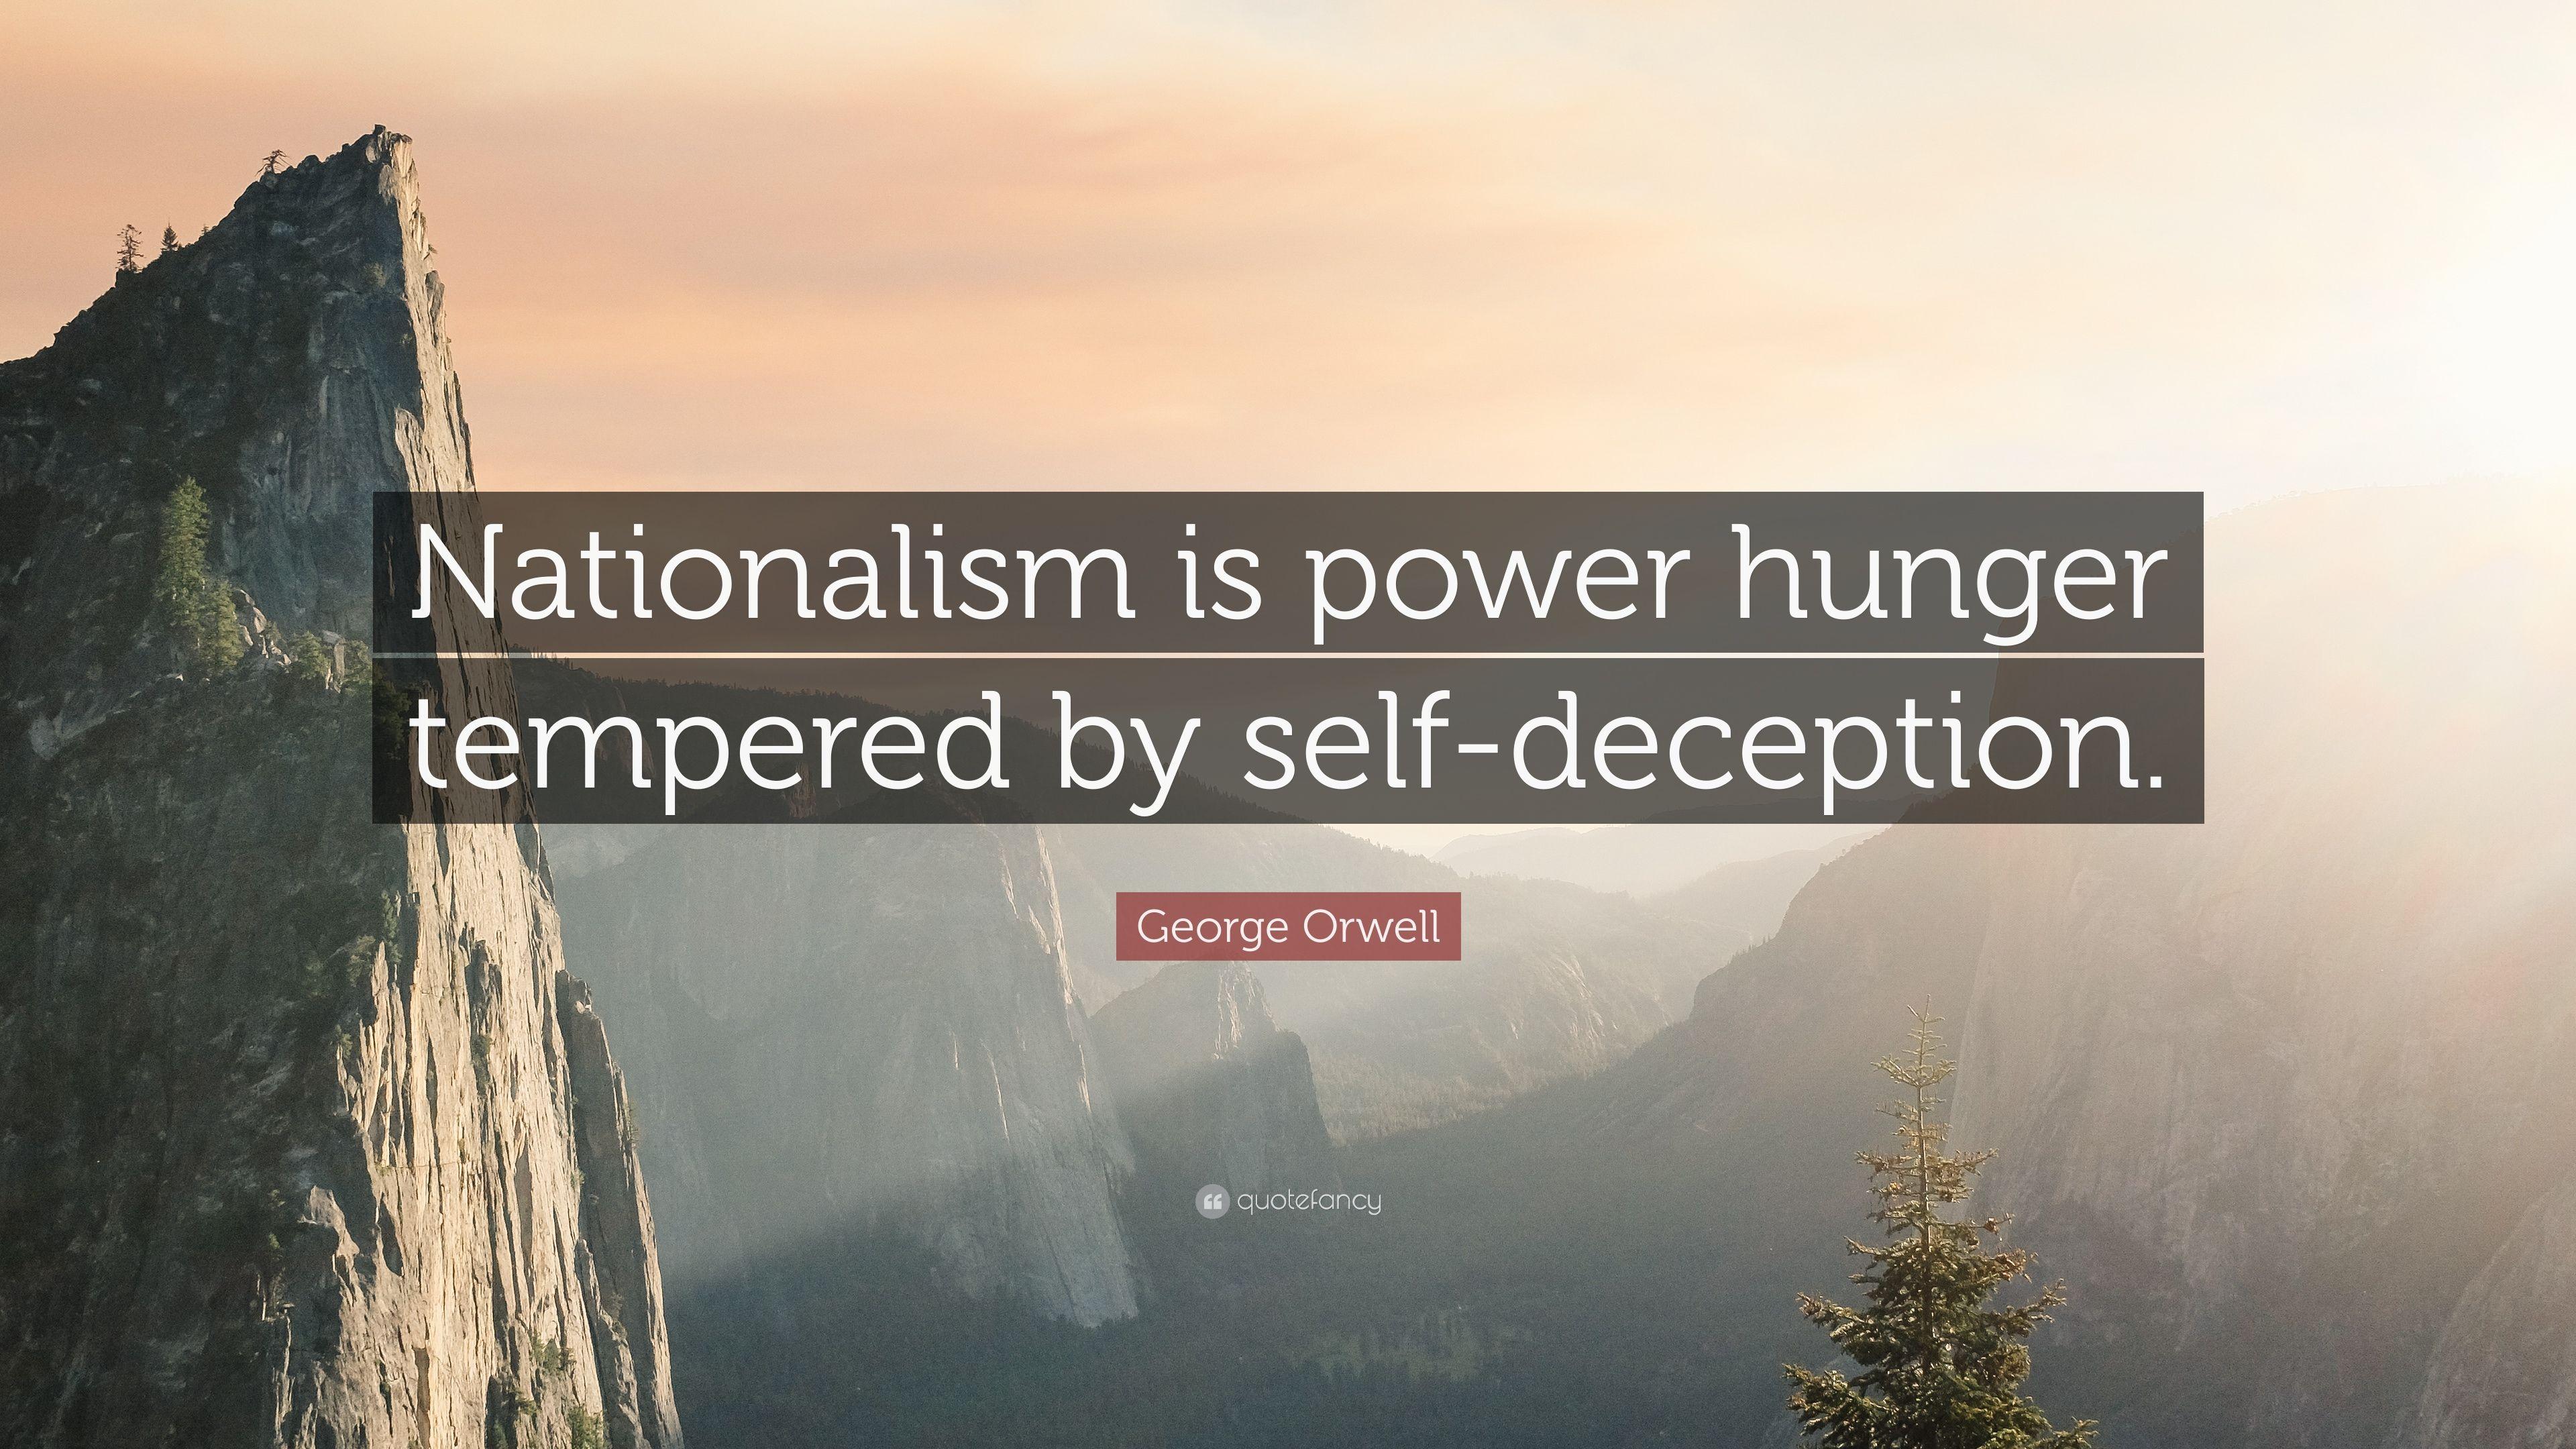 George Orwell Quote: “Nationalism is power hunger tempered